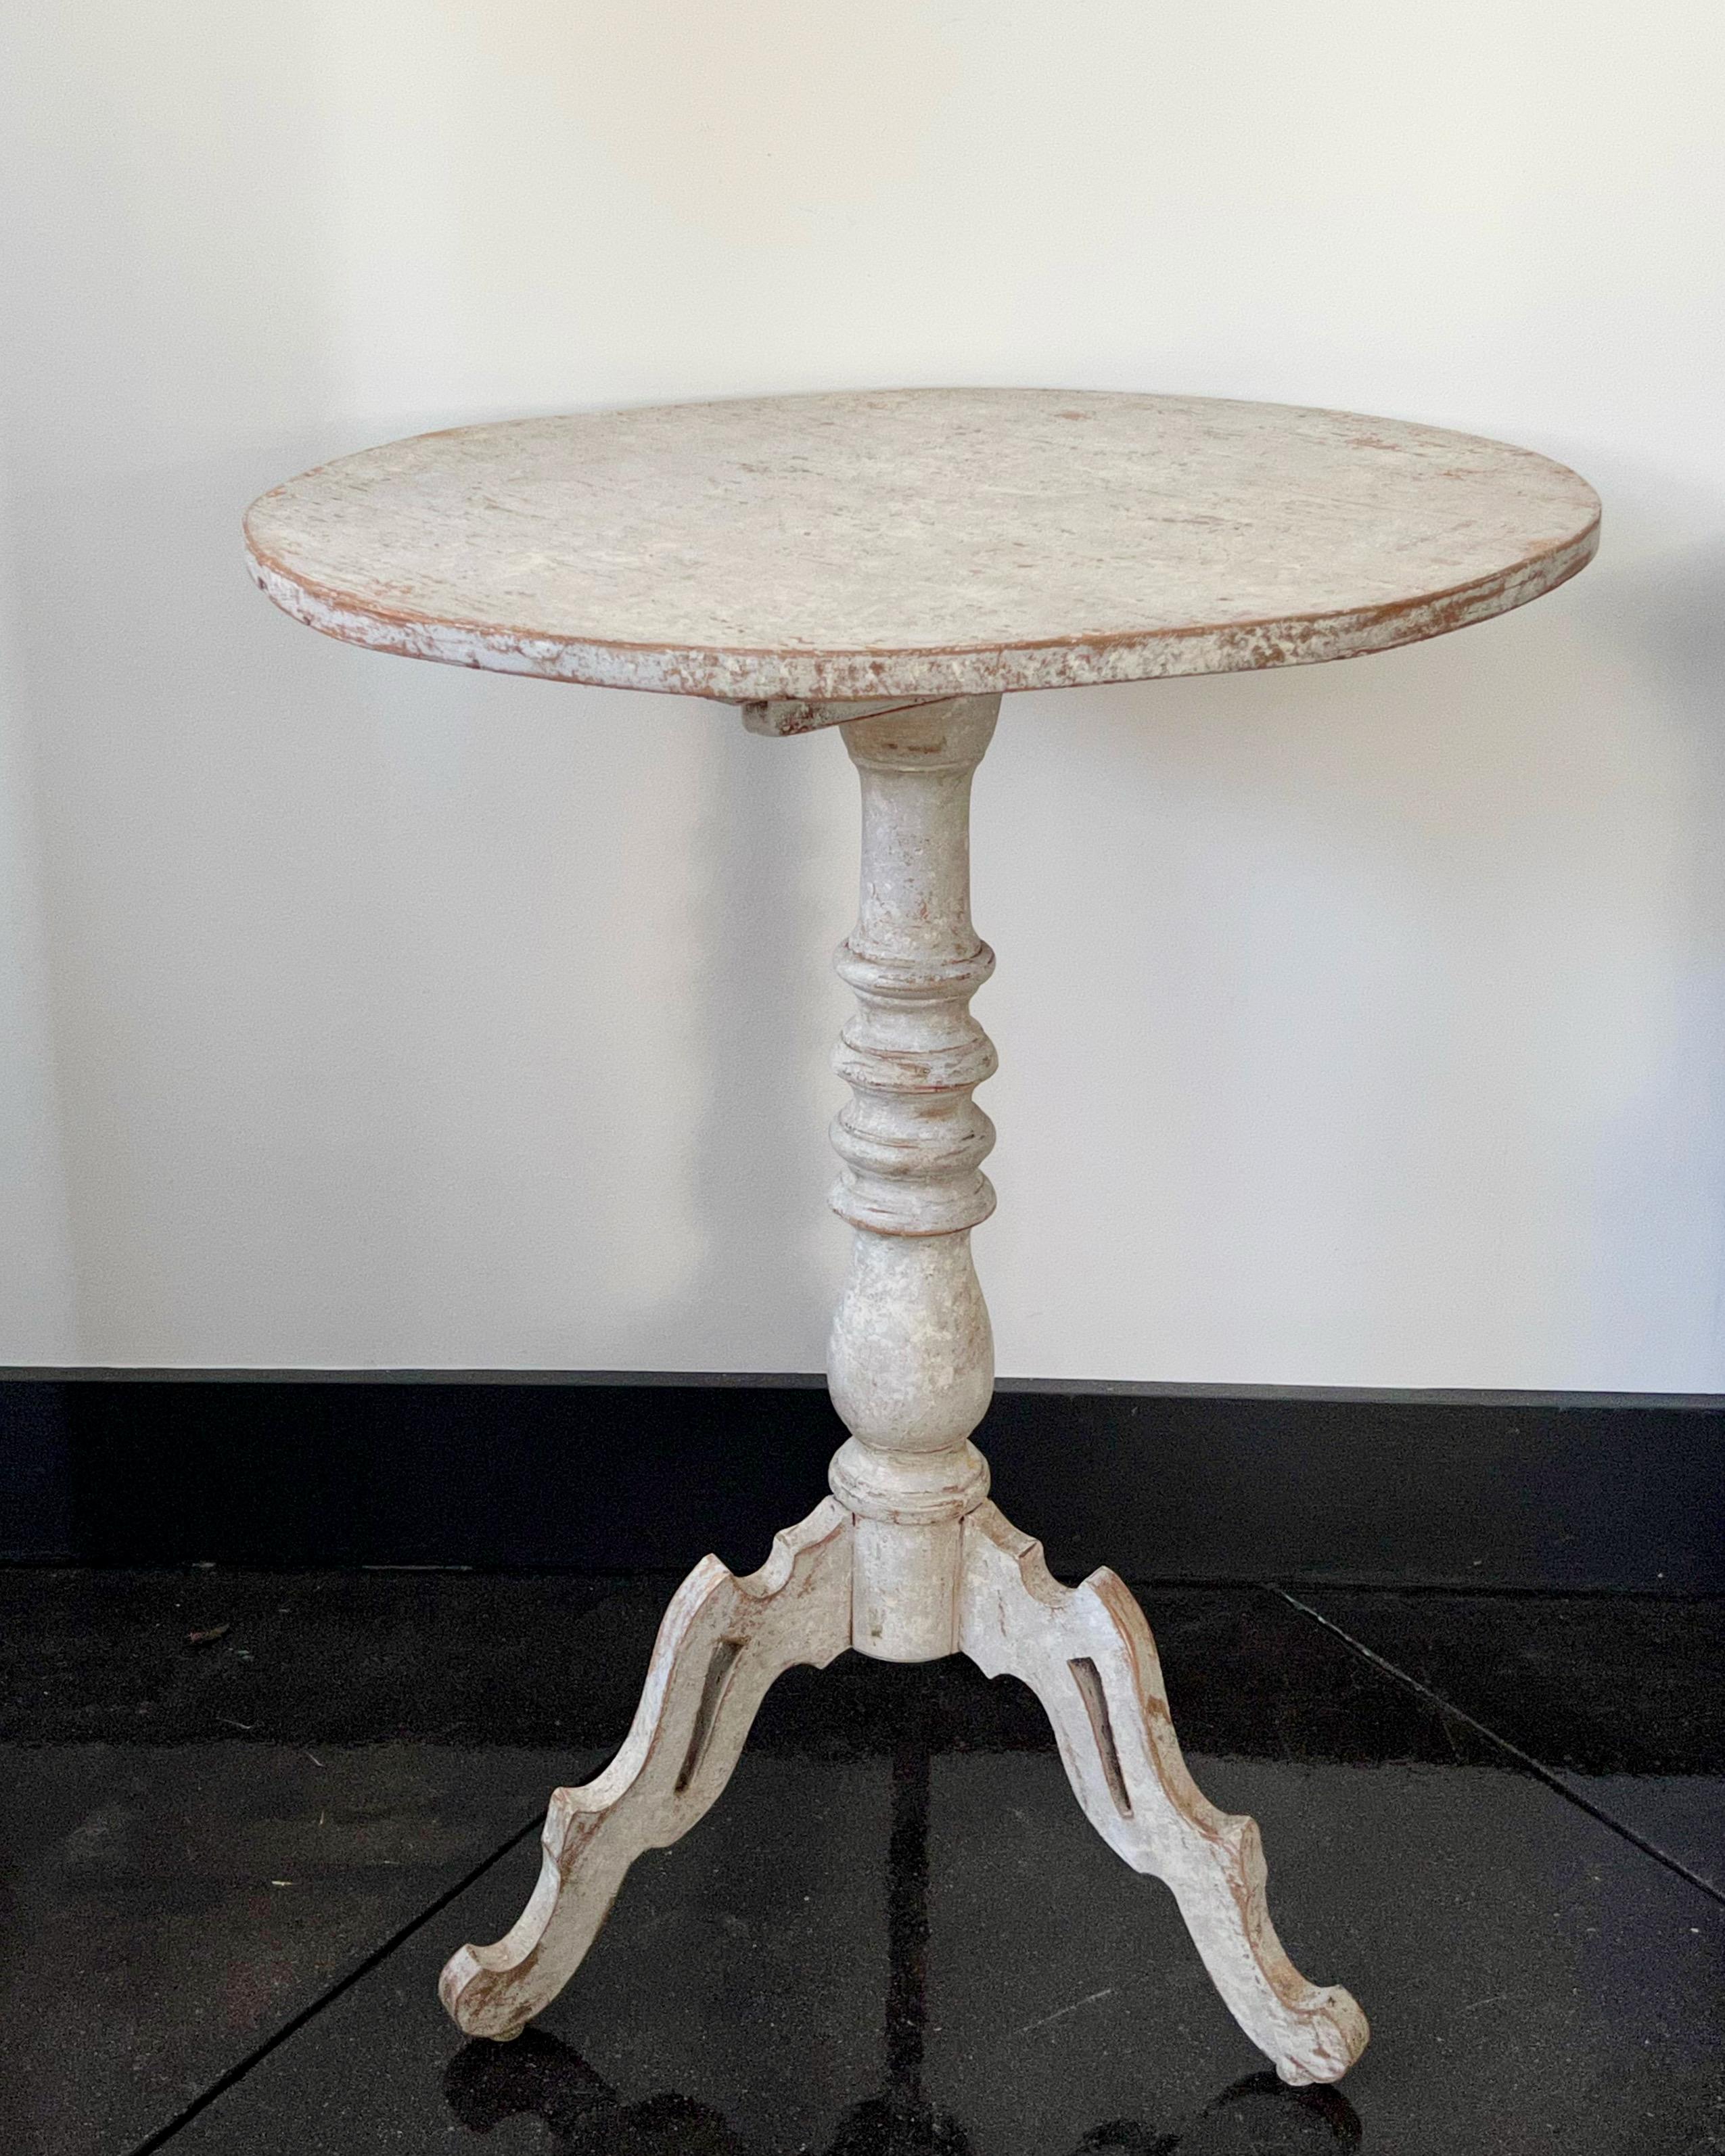 A charming large round pedestal table with turned base supported by beautifully carved legs.
Värmland, Sweden, circa 1830-40
More than ever, we selected the best, the rarest, the unusual, the spectacular, the most charming, what makes people